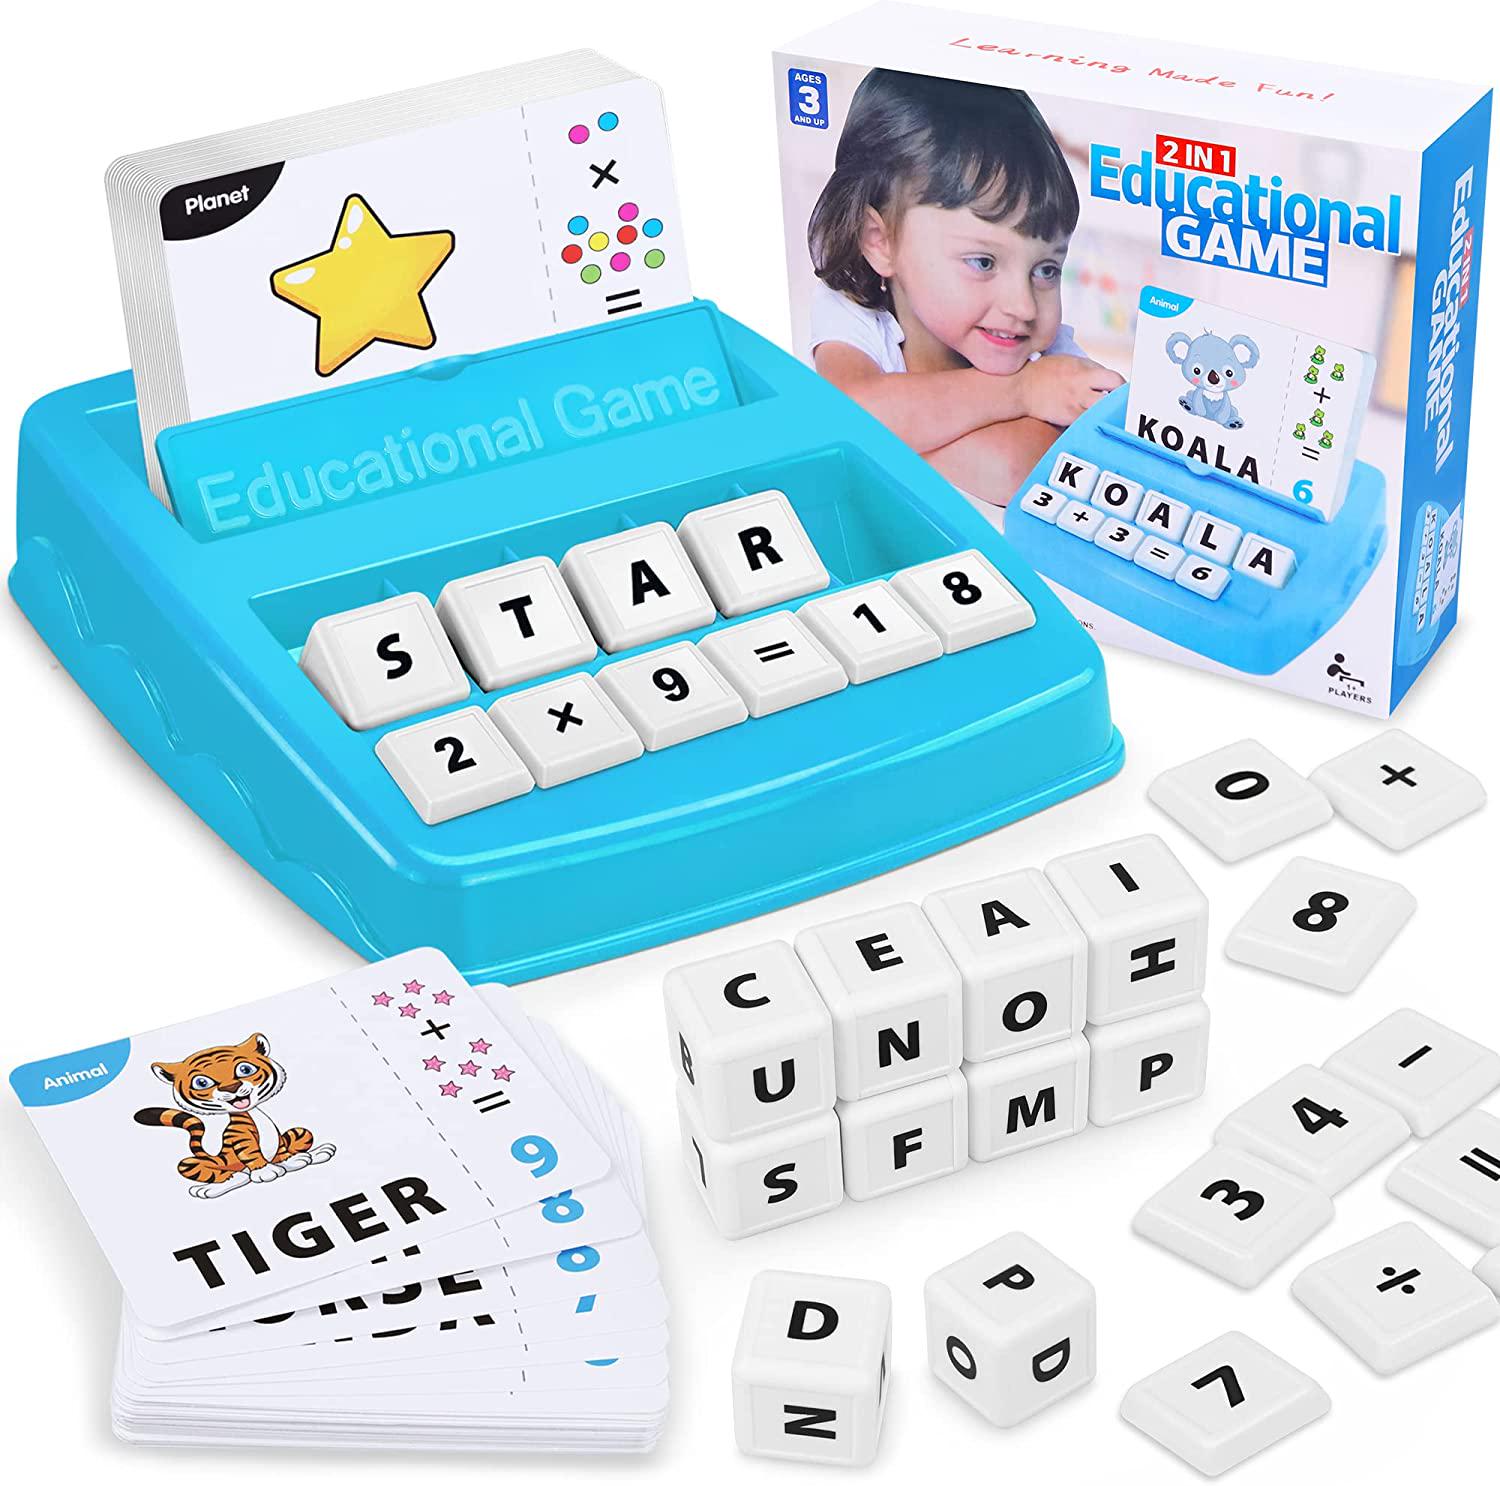 Toyk, Educational Matching Letter Game, Sight Word Games, Interactive Game Toys. for Kids Toys Educational Learning Toys for Boys Girls Birthday Party Gifts for 3 4 5 6 Year Olds